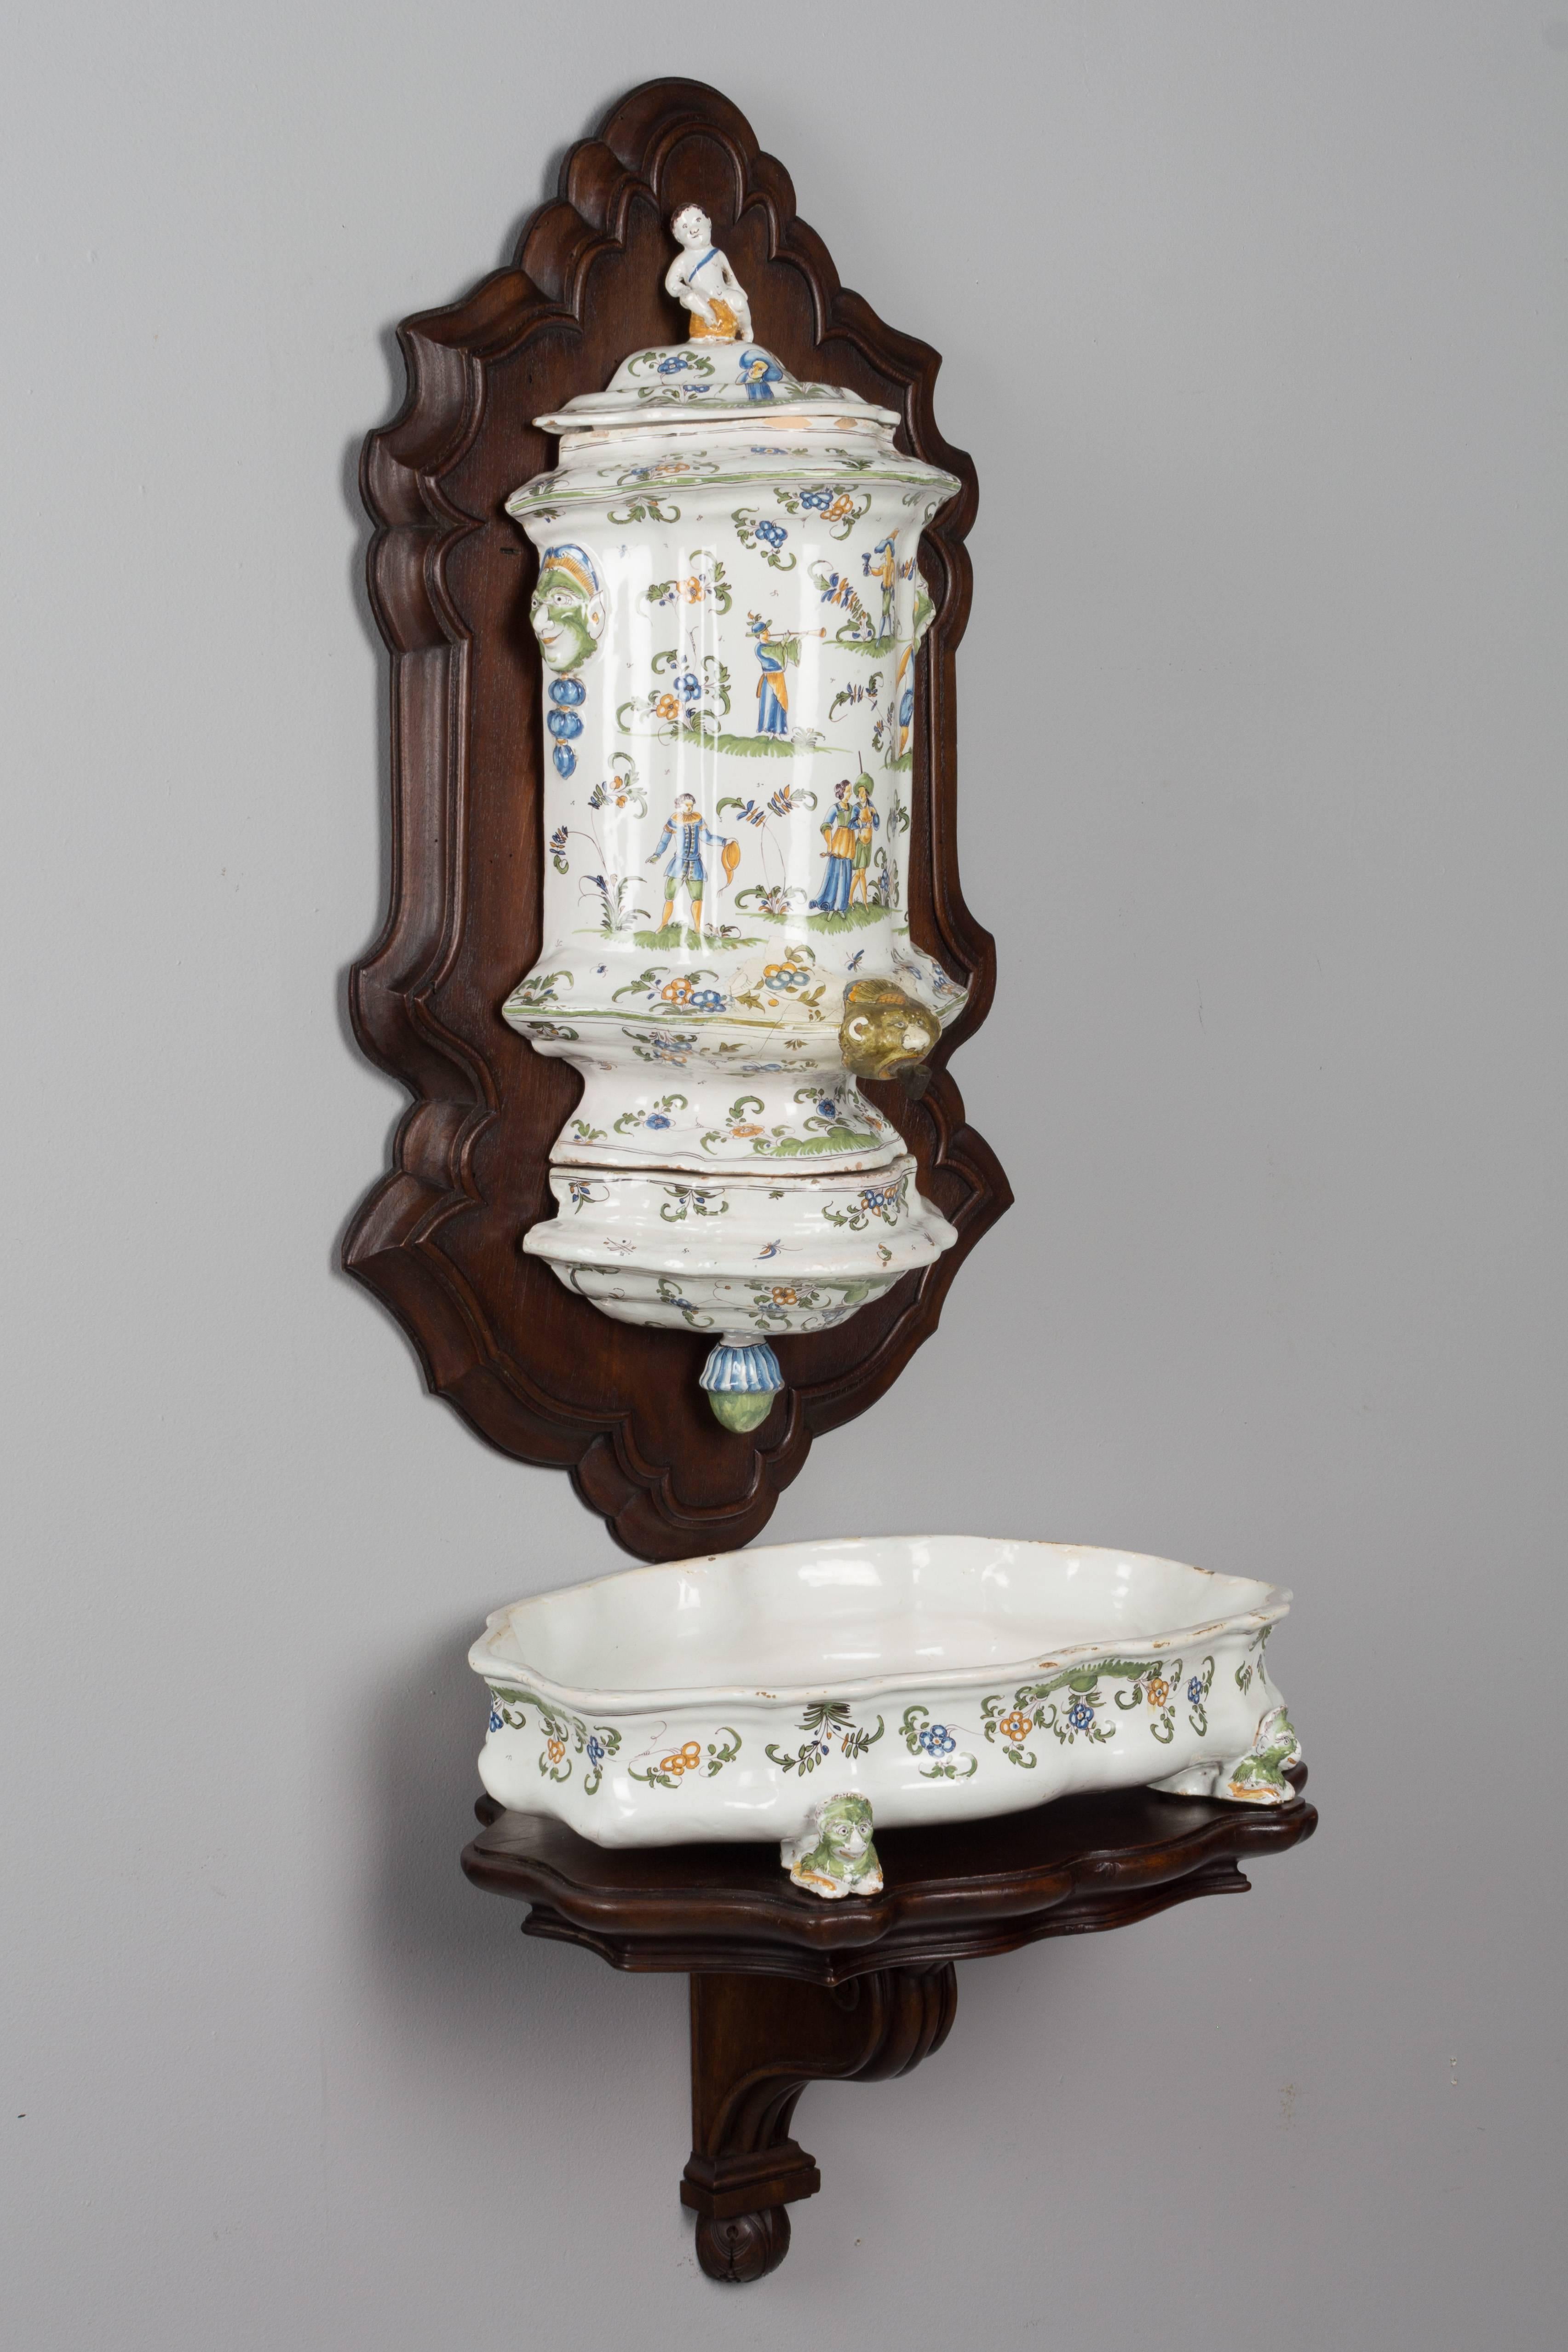 A French faience Louis XV style lavabo from Moustiers. The urn is in three parts that attach to a walnut plaque and the shallow basin rests on a walnut wall bracket. Hand-painted in blue, green and yellow with figures in a pastoral setting with